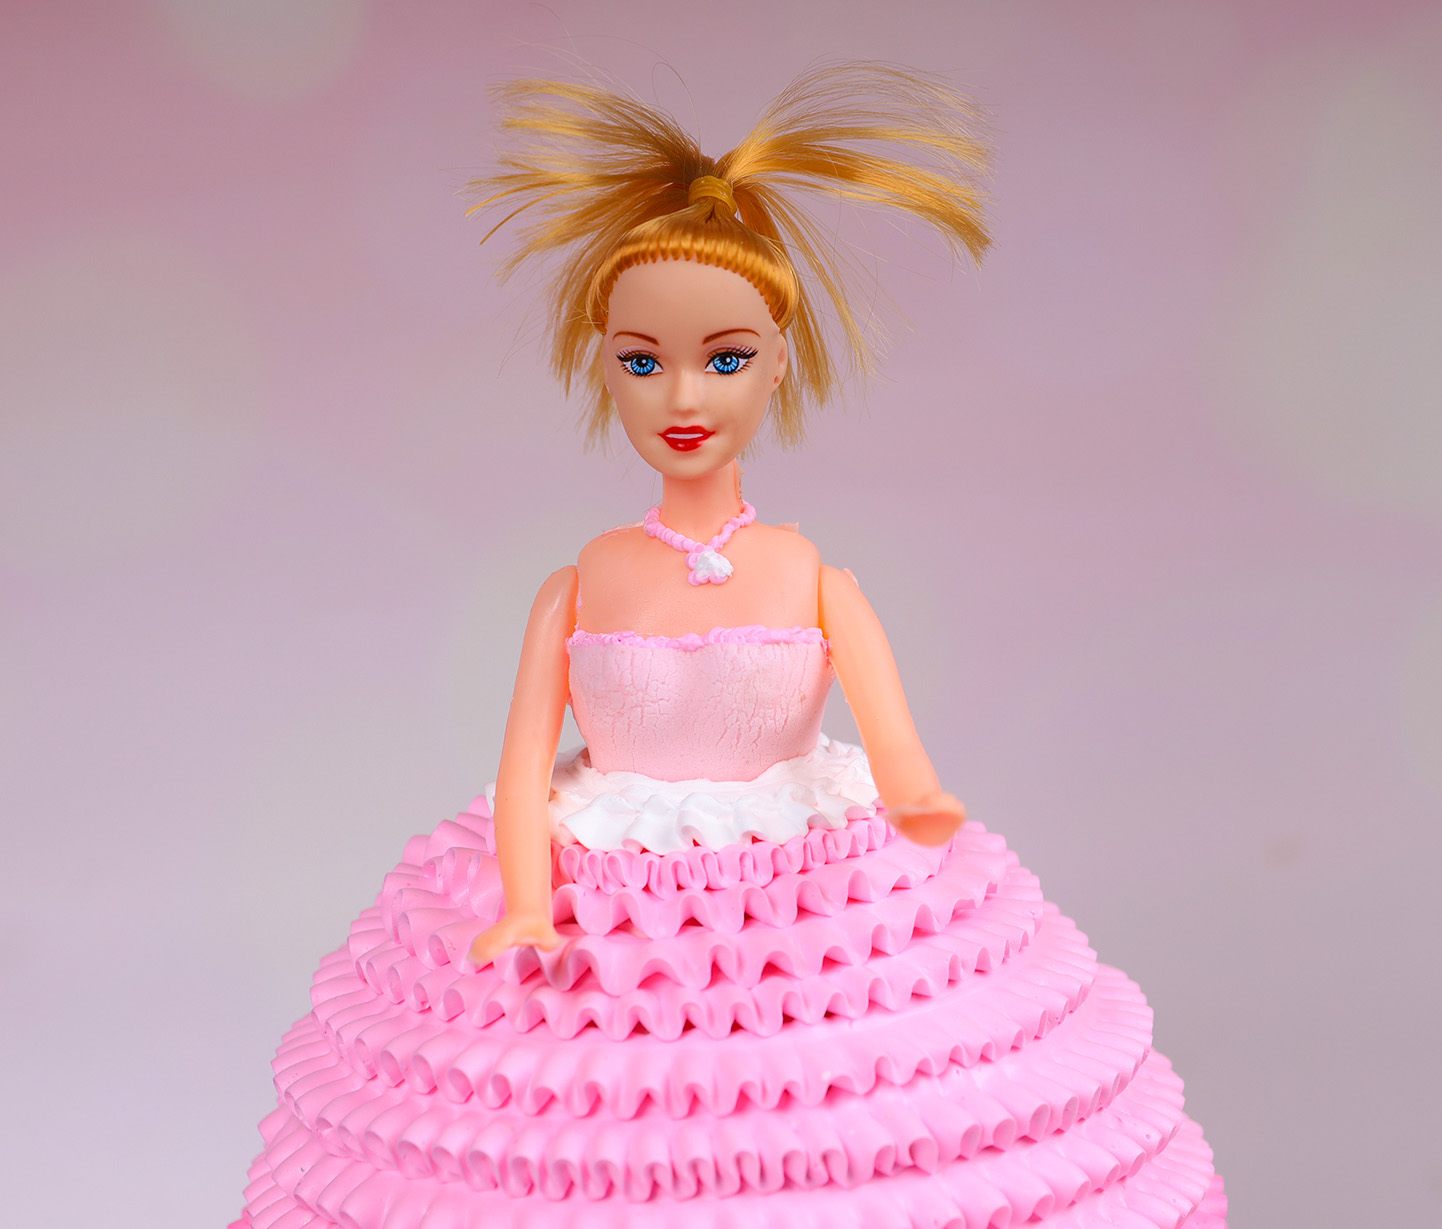 2 Tier Doll Cake | Doll cake designs, Doll cake, Barbie doll cakes